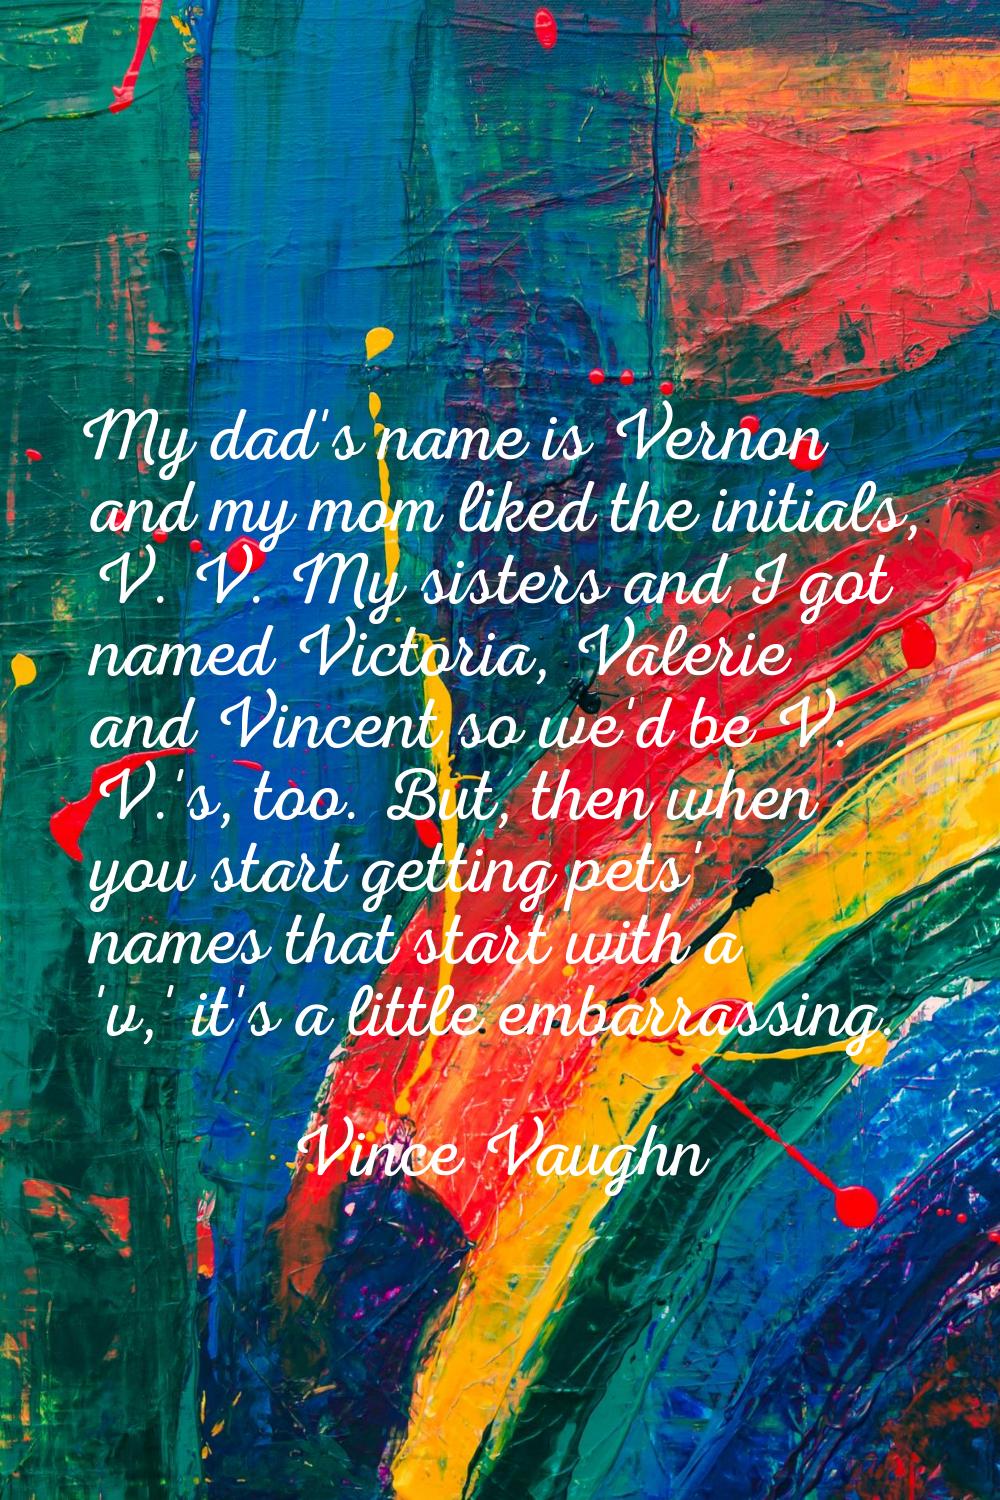 My dad's name is Vernon and my mom liked the initials, V. V. My sisters and I got named Victoria, V